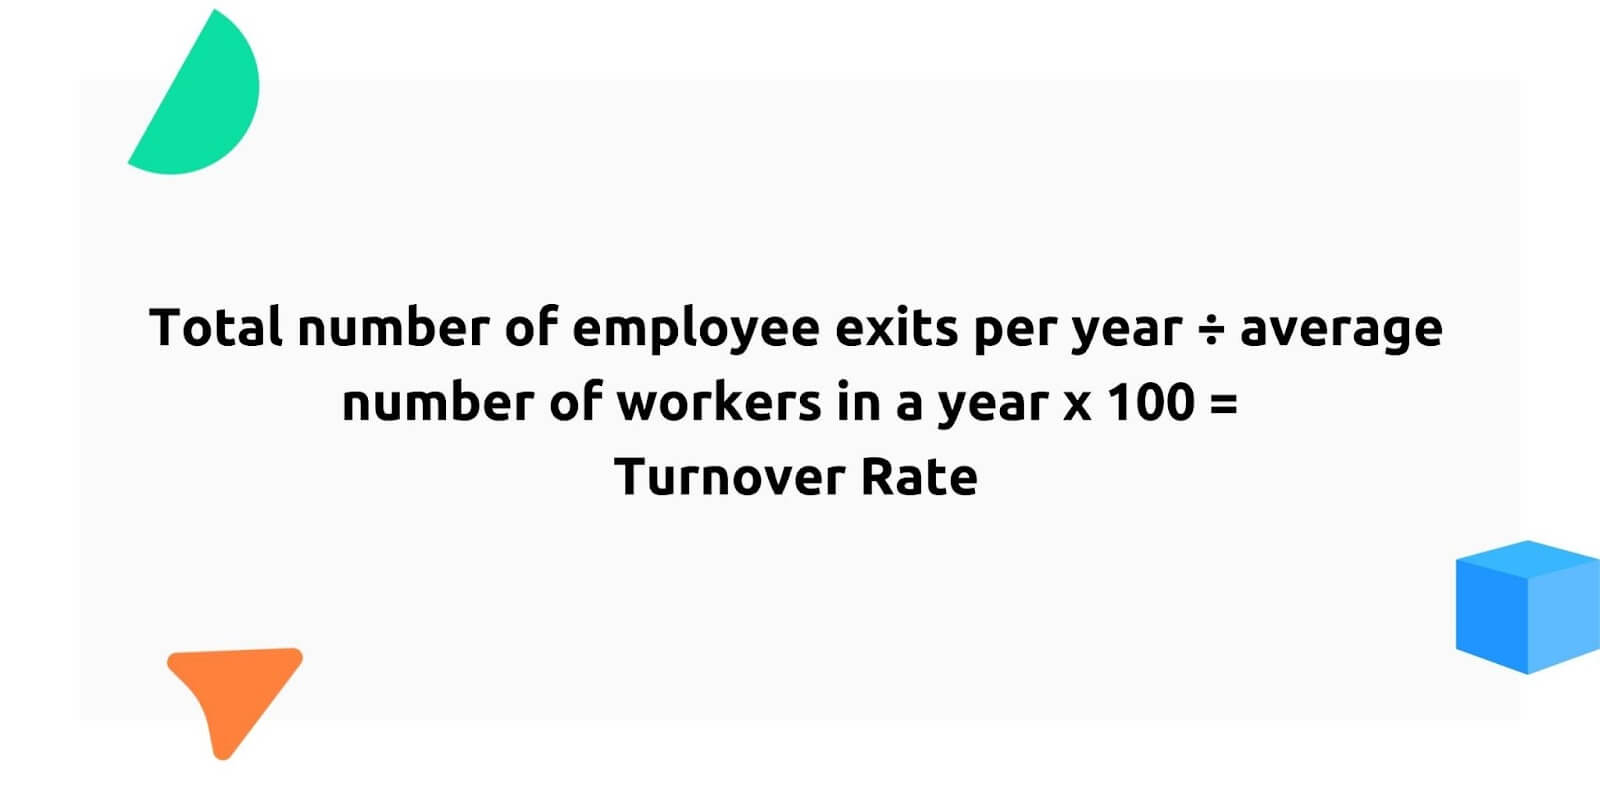 Turnover rate

Total number of employee exits per year divided by average number of workers in a year times 100 = turnover rate